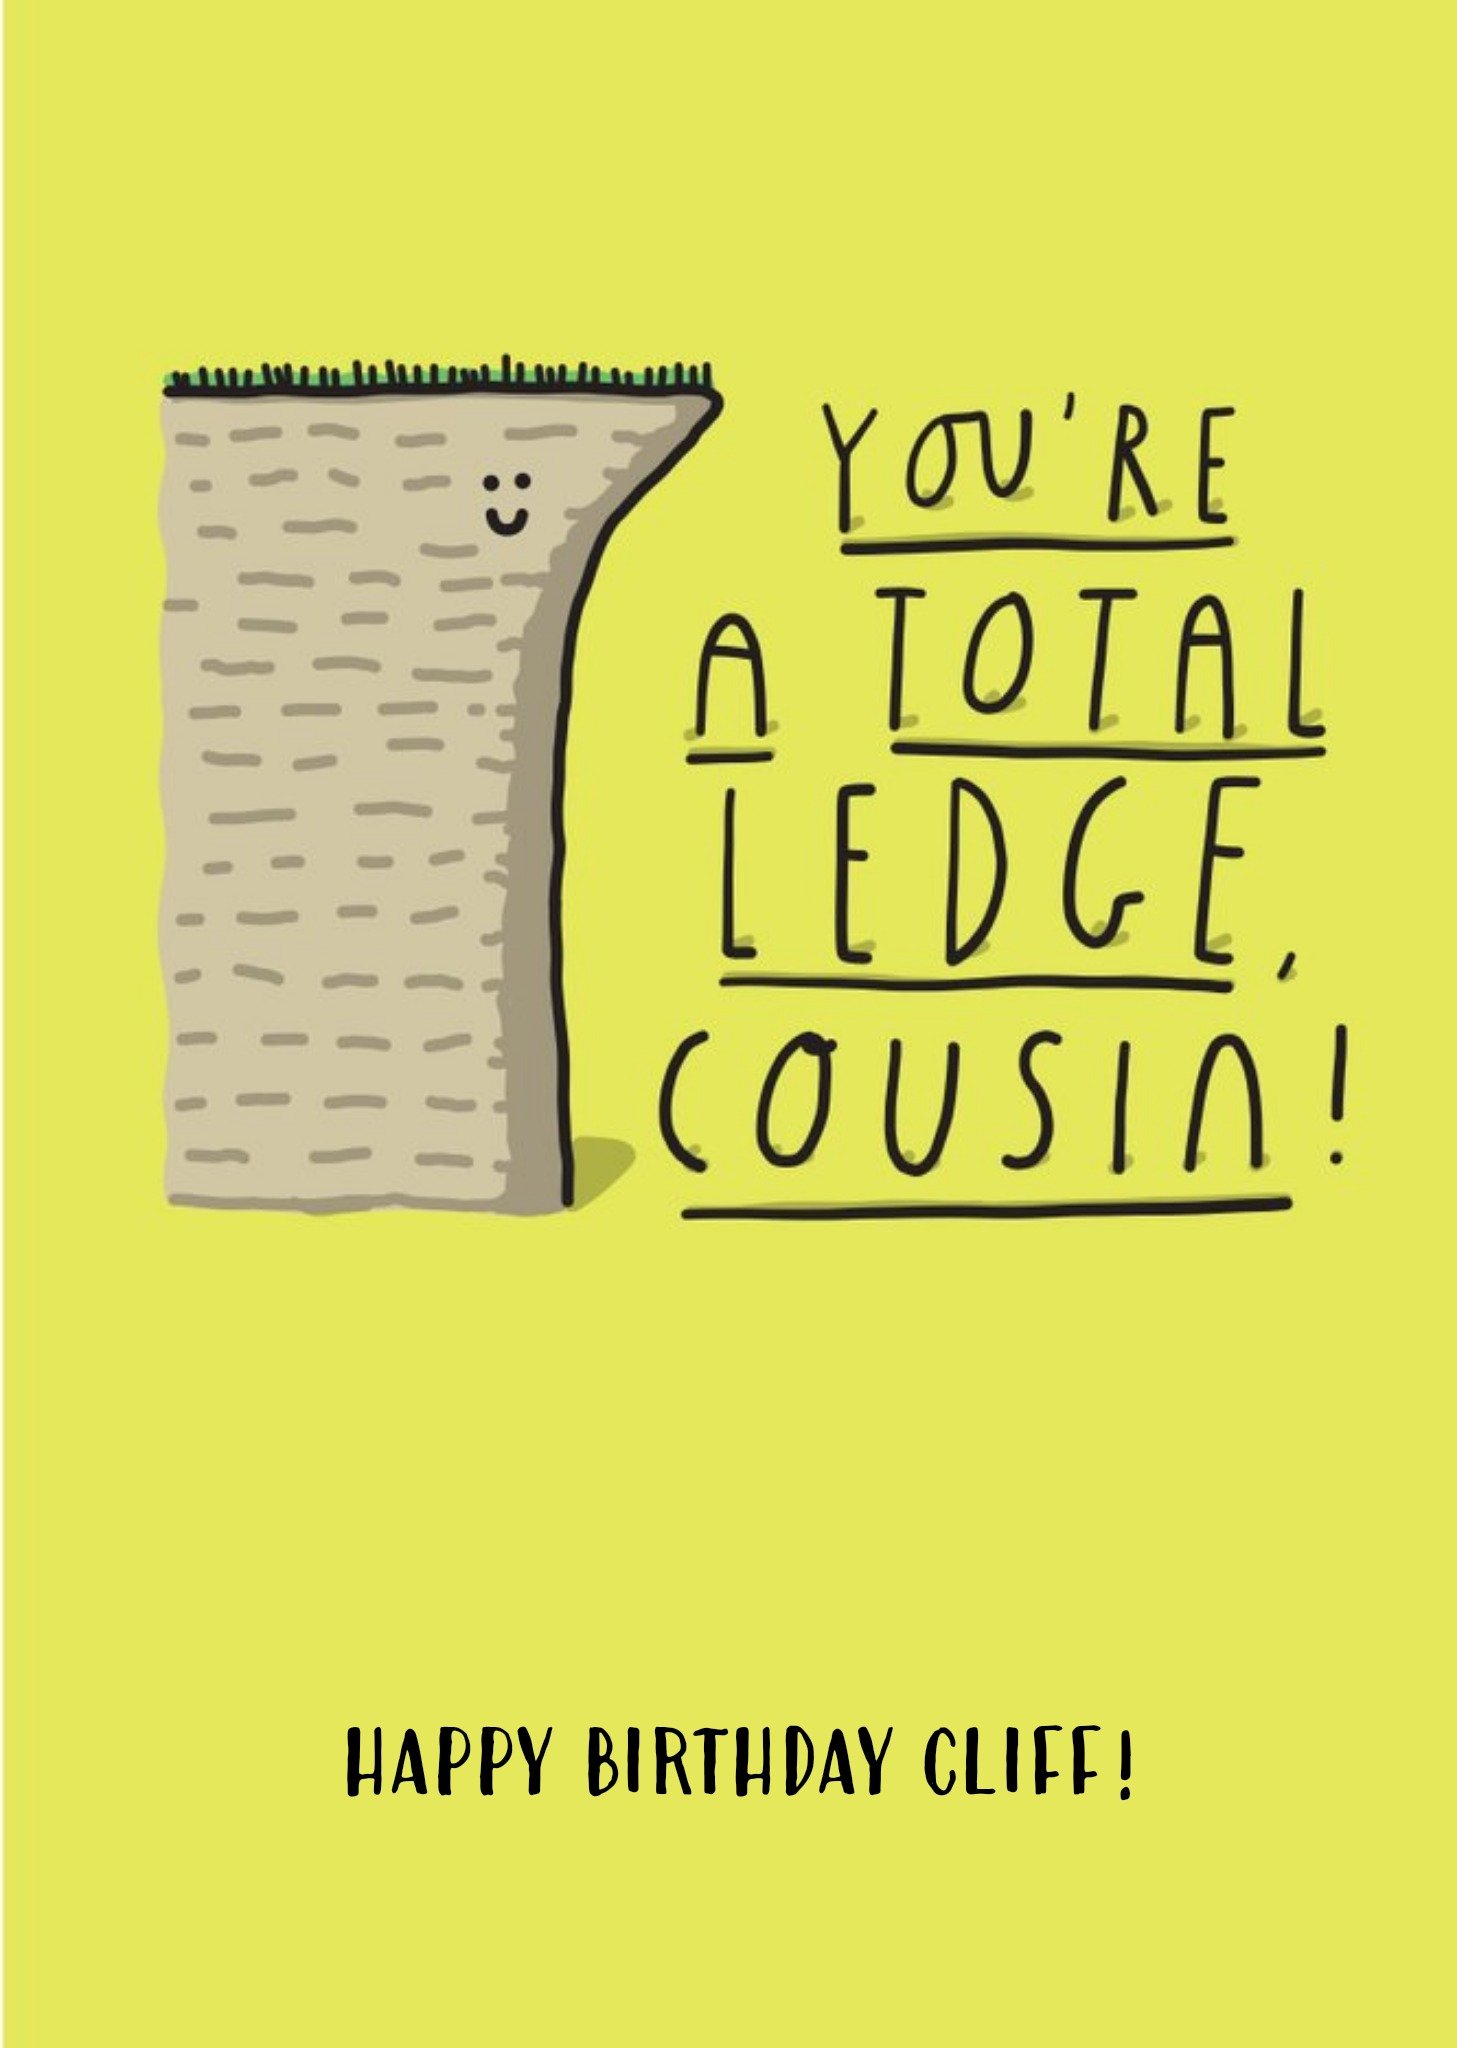 Moonpig You're A Total Ledge Cousin Funny Birthday Card, Large